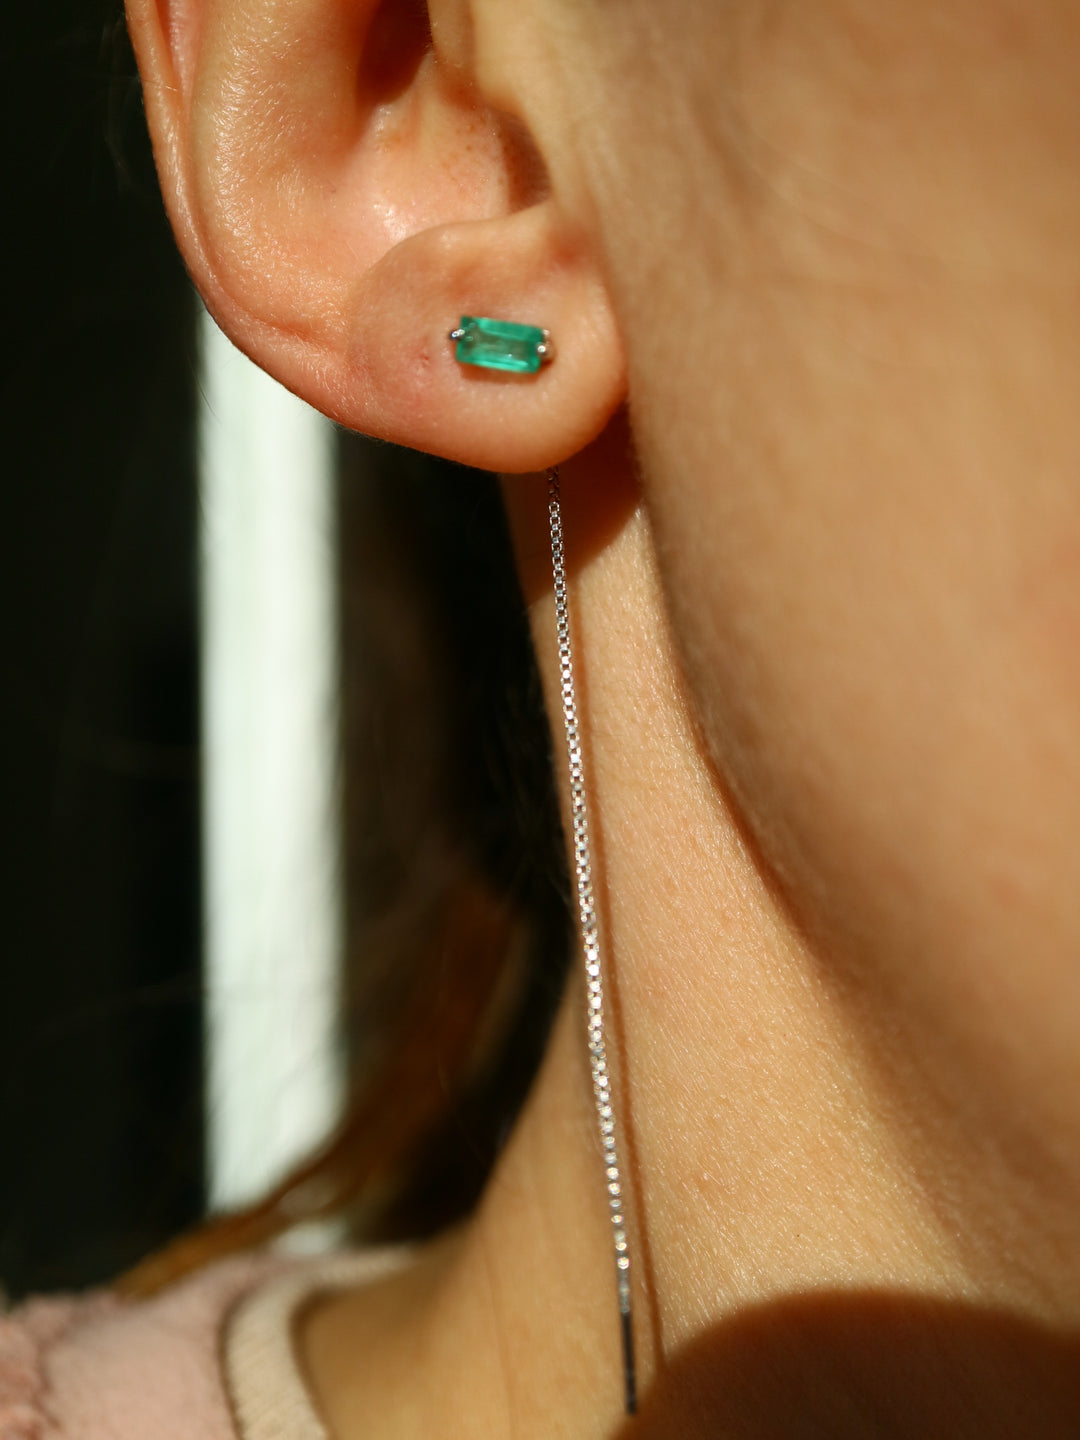 Natural Emerald Threader Chain Silver Cartilage Helix second piercing Earring